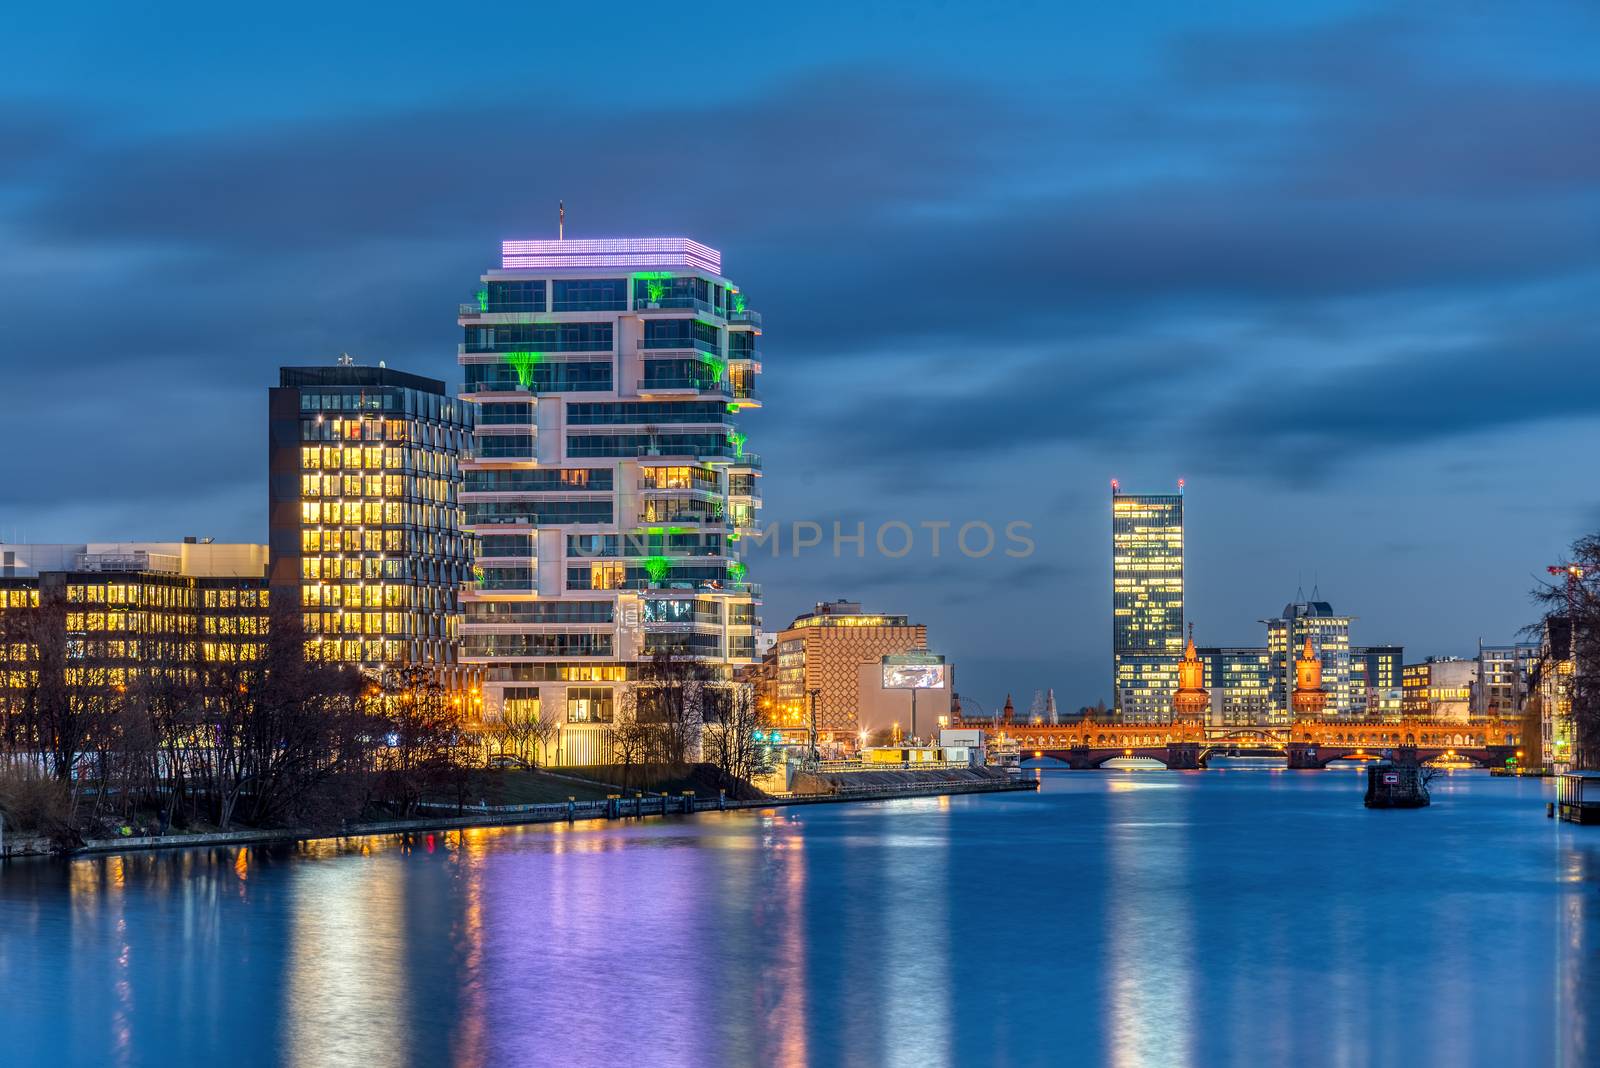 The river Spree in Berlin at night with the Oberbaum Bridge in the back